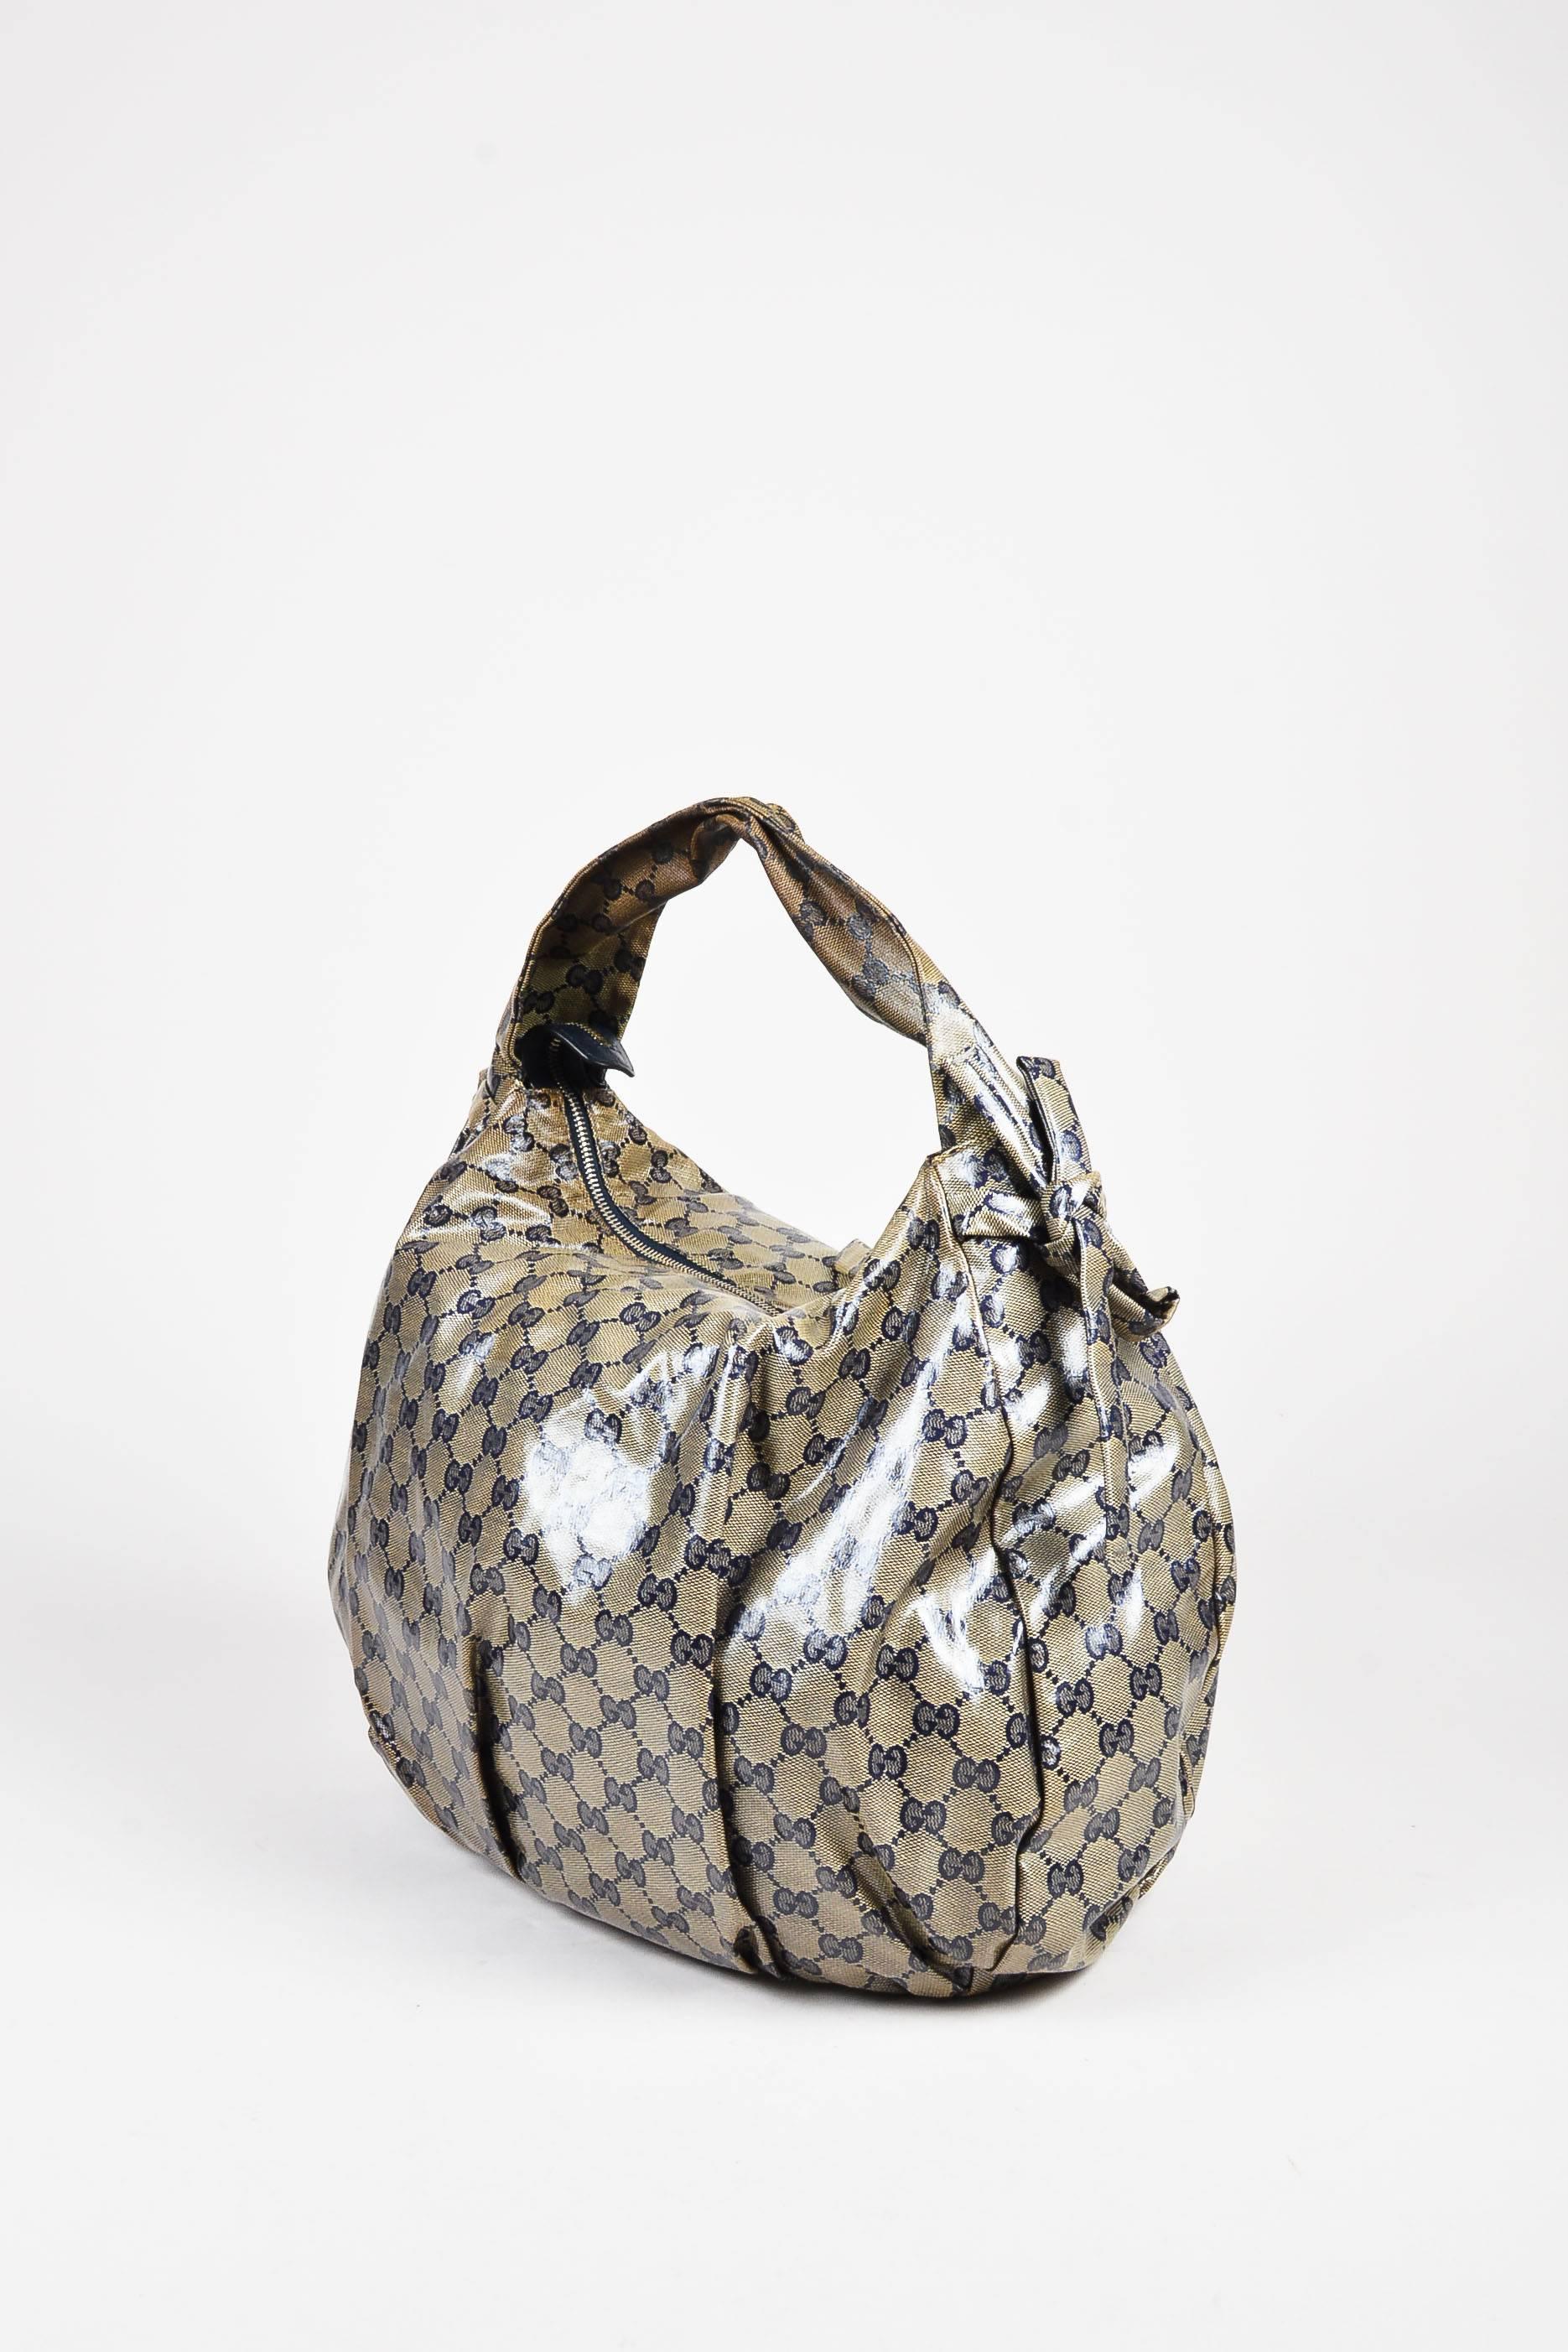 Comes in dust bag. Roomy hobo bag is constructed of slick monogram coated canvas. Metal logo plate on front. Top zip closure with tie accents at each side. Flat top strap. Serial number reads, 